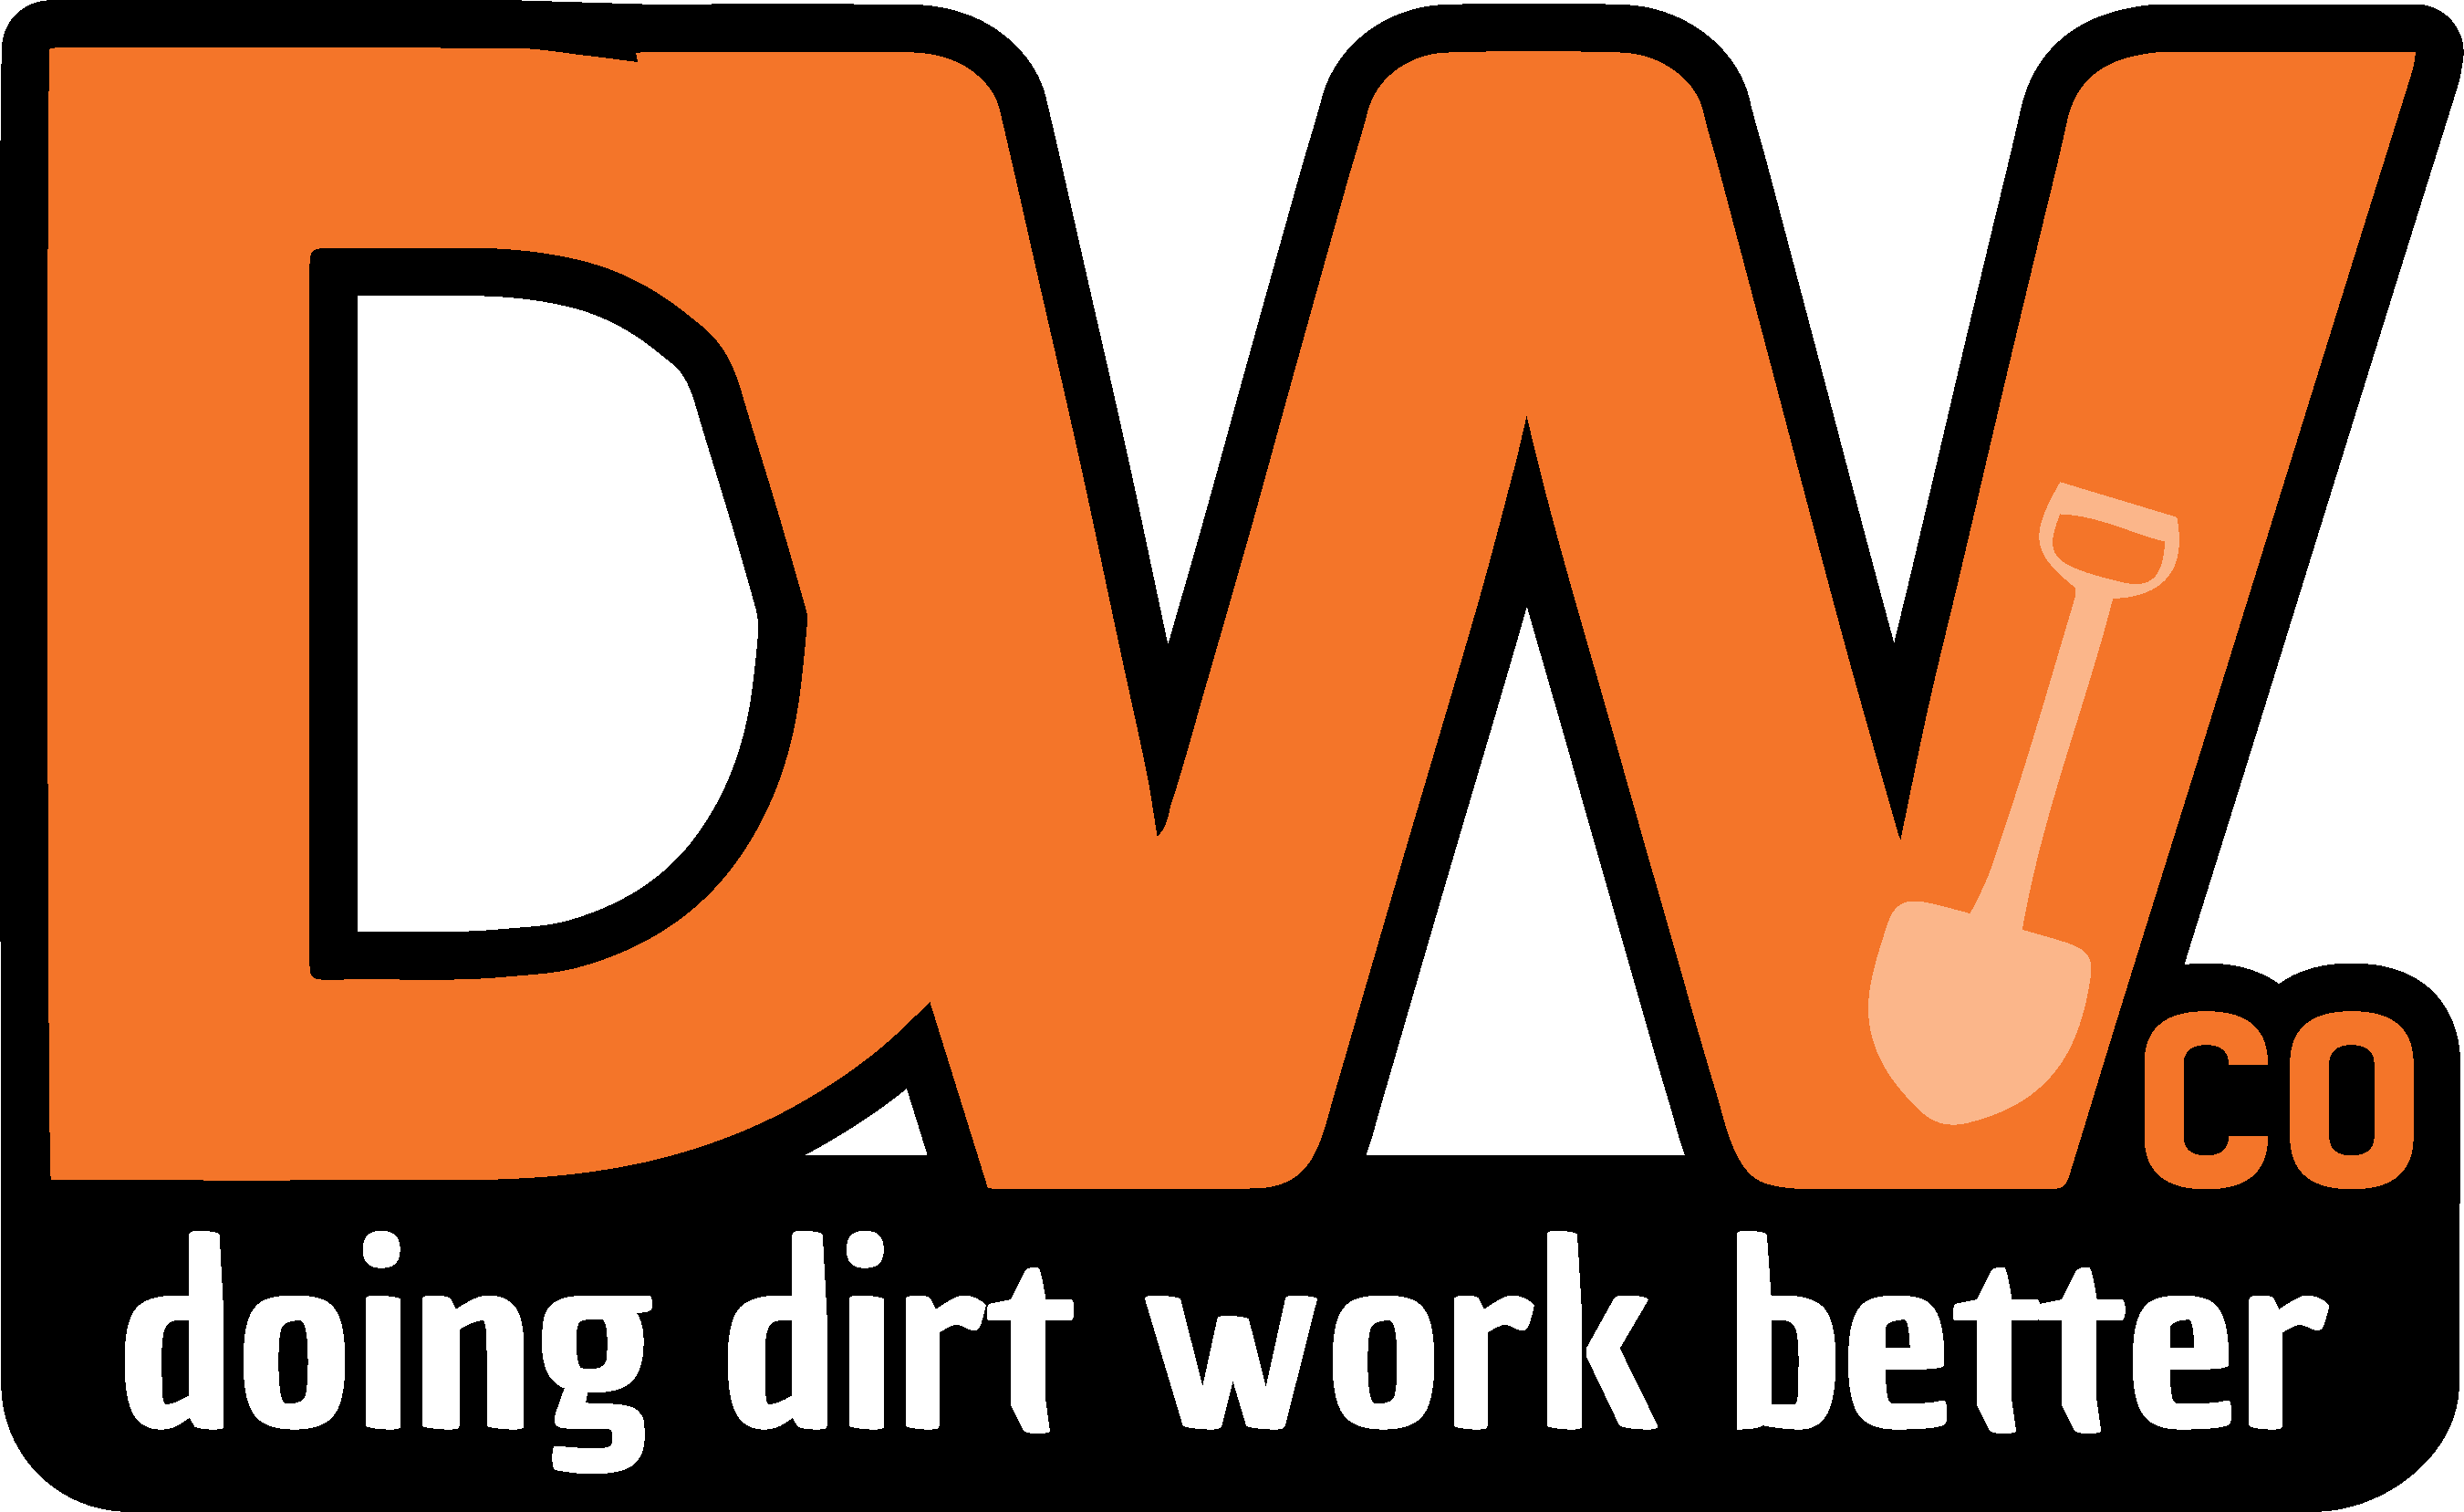 A logo for the dirt work better project.